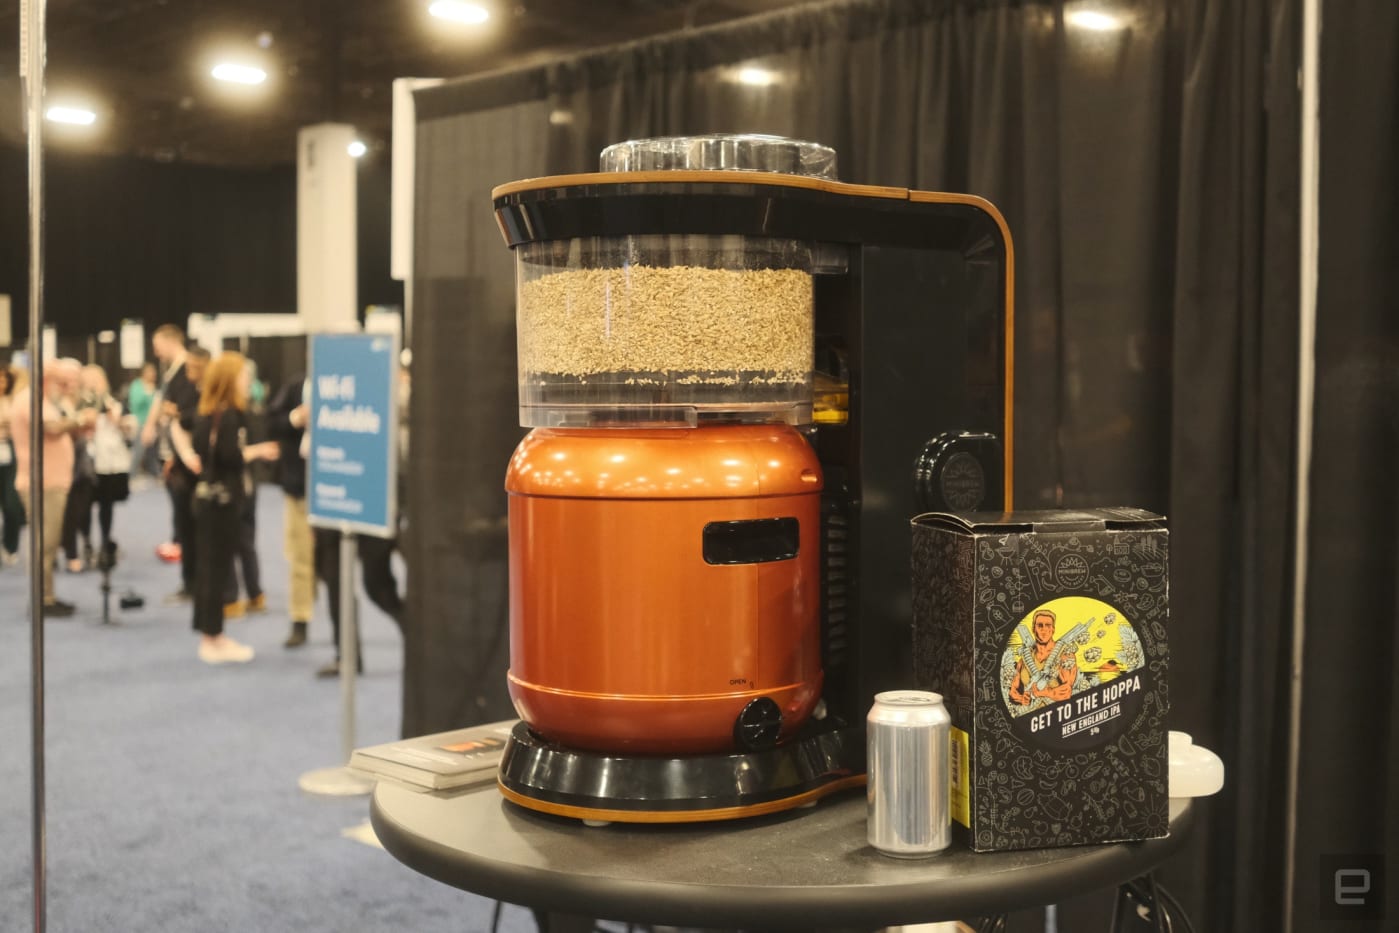 Exobrew is the latest machine trying to make homebrewing beer beginner friendly